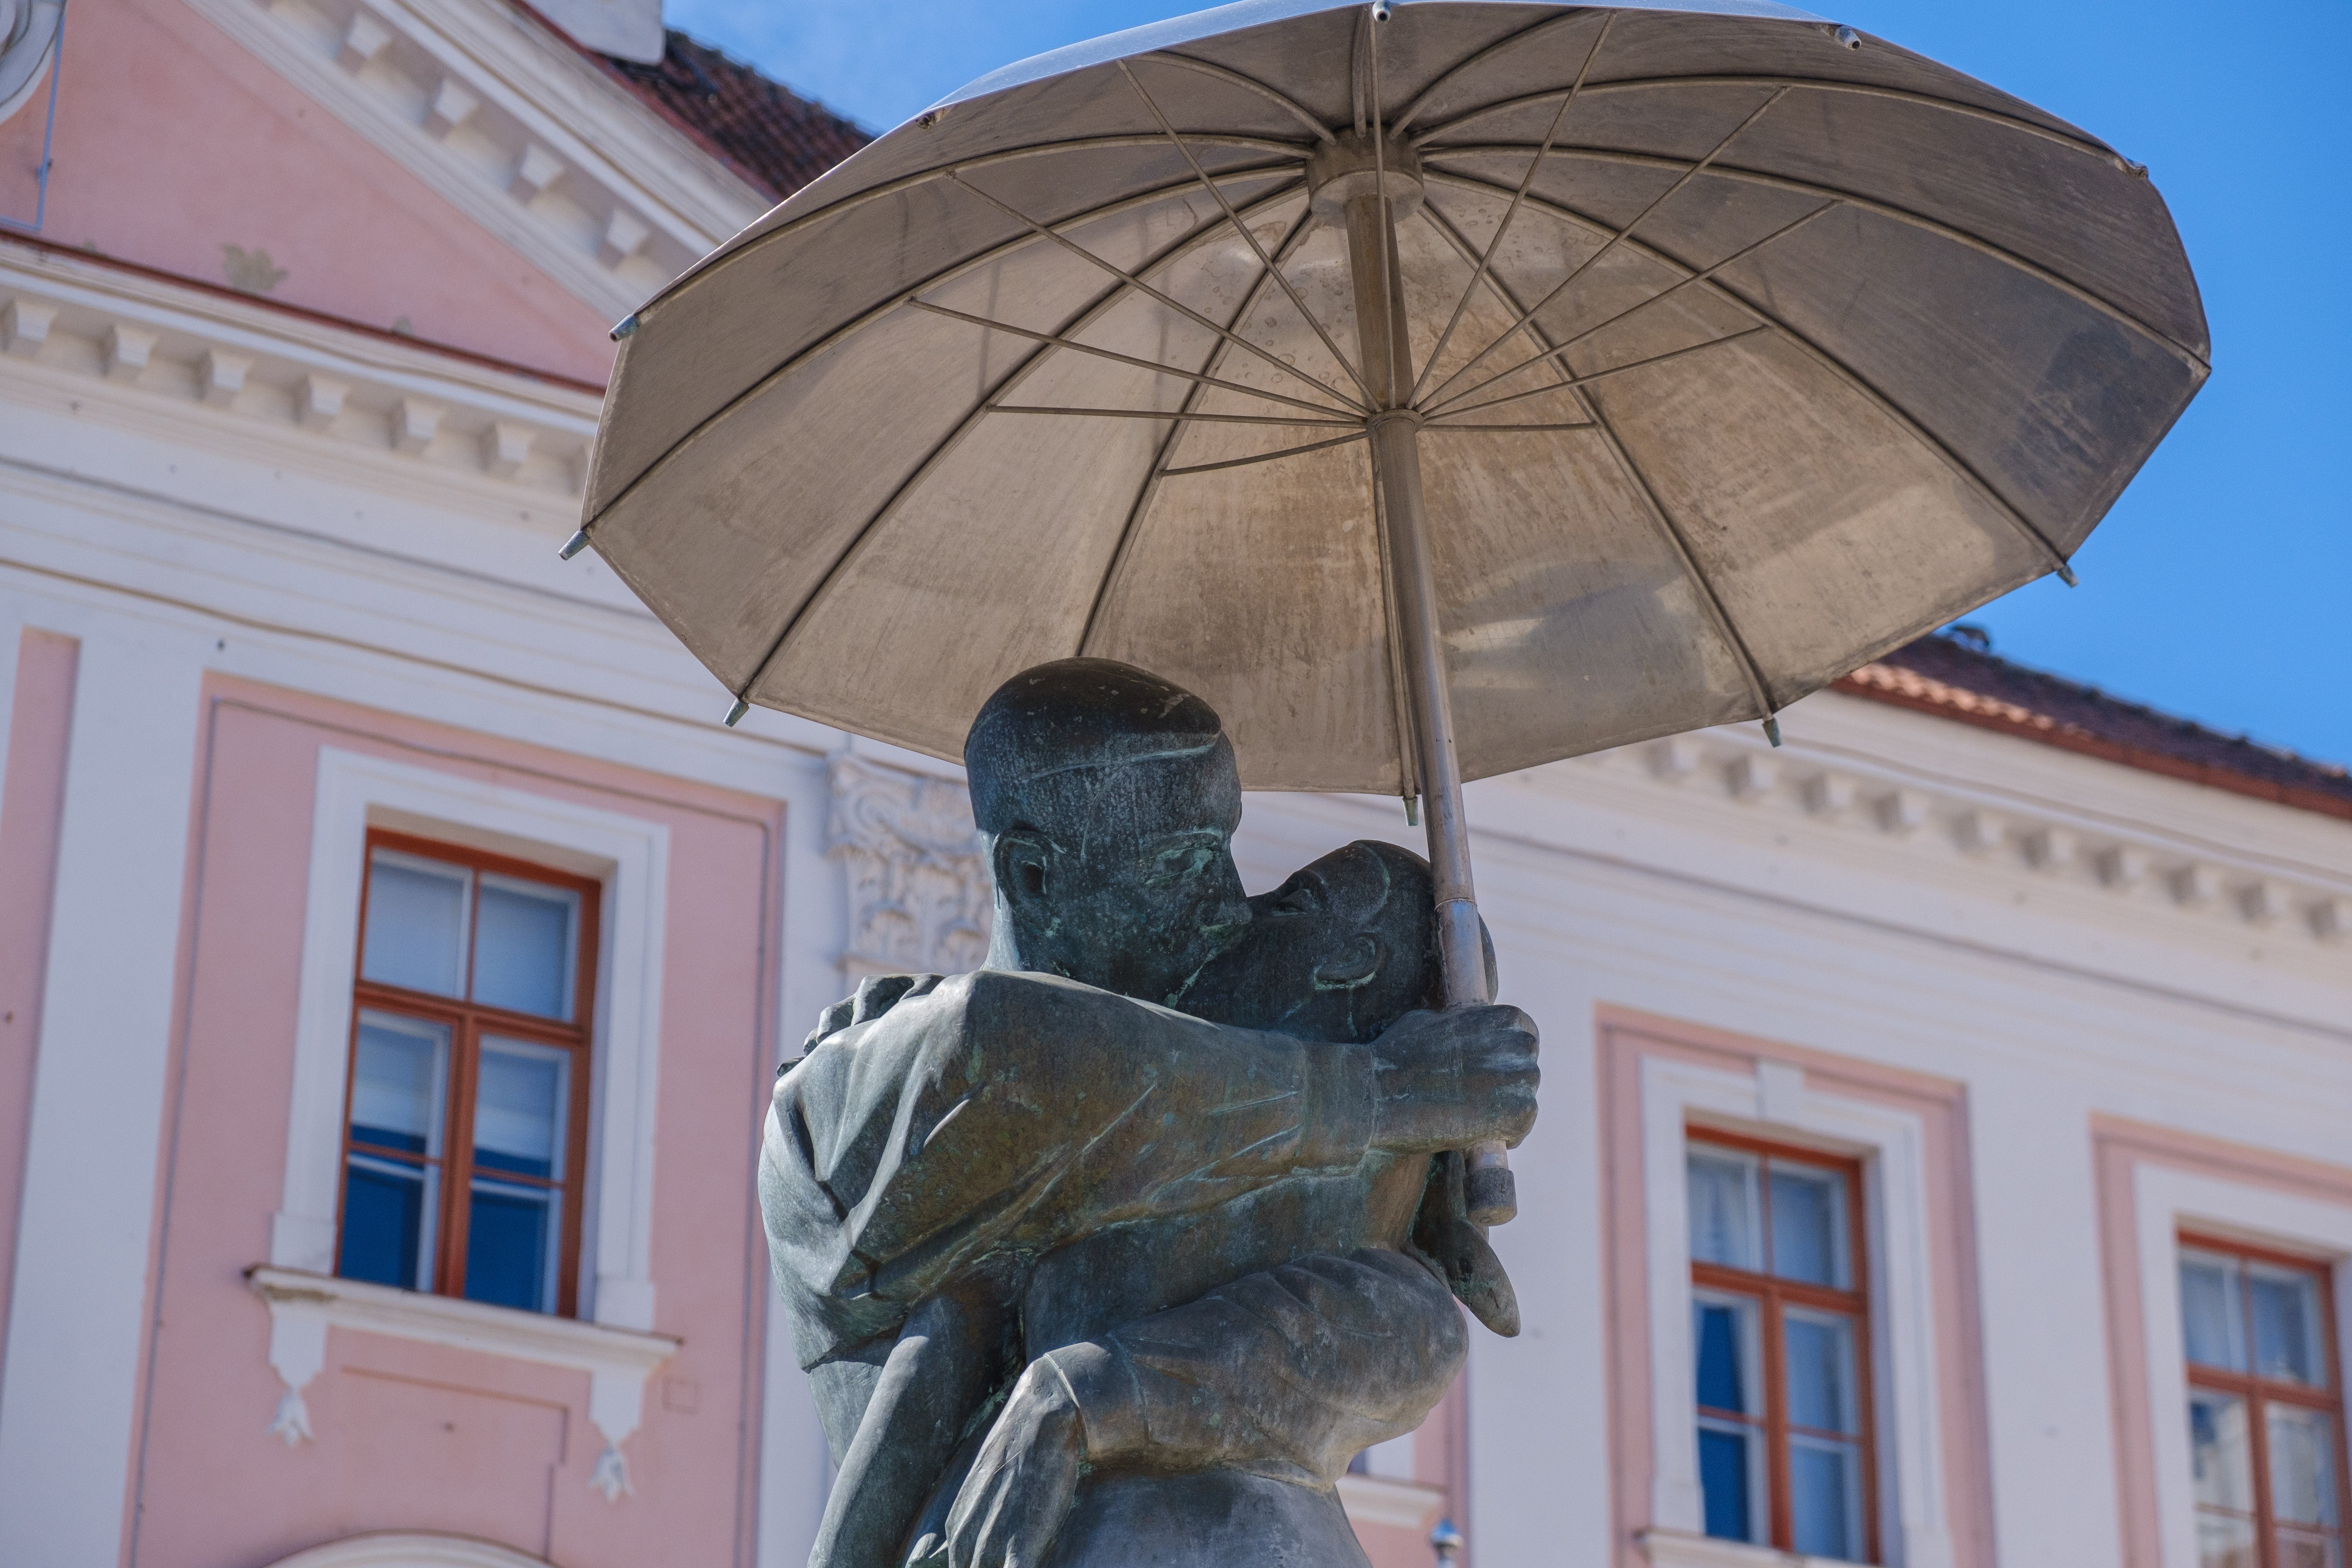 The embracing couple have stood in Tartu’s central square for more than 70 years